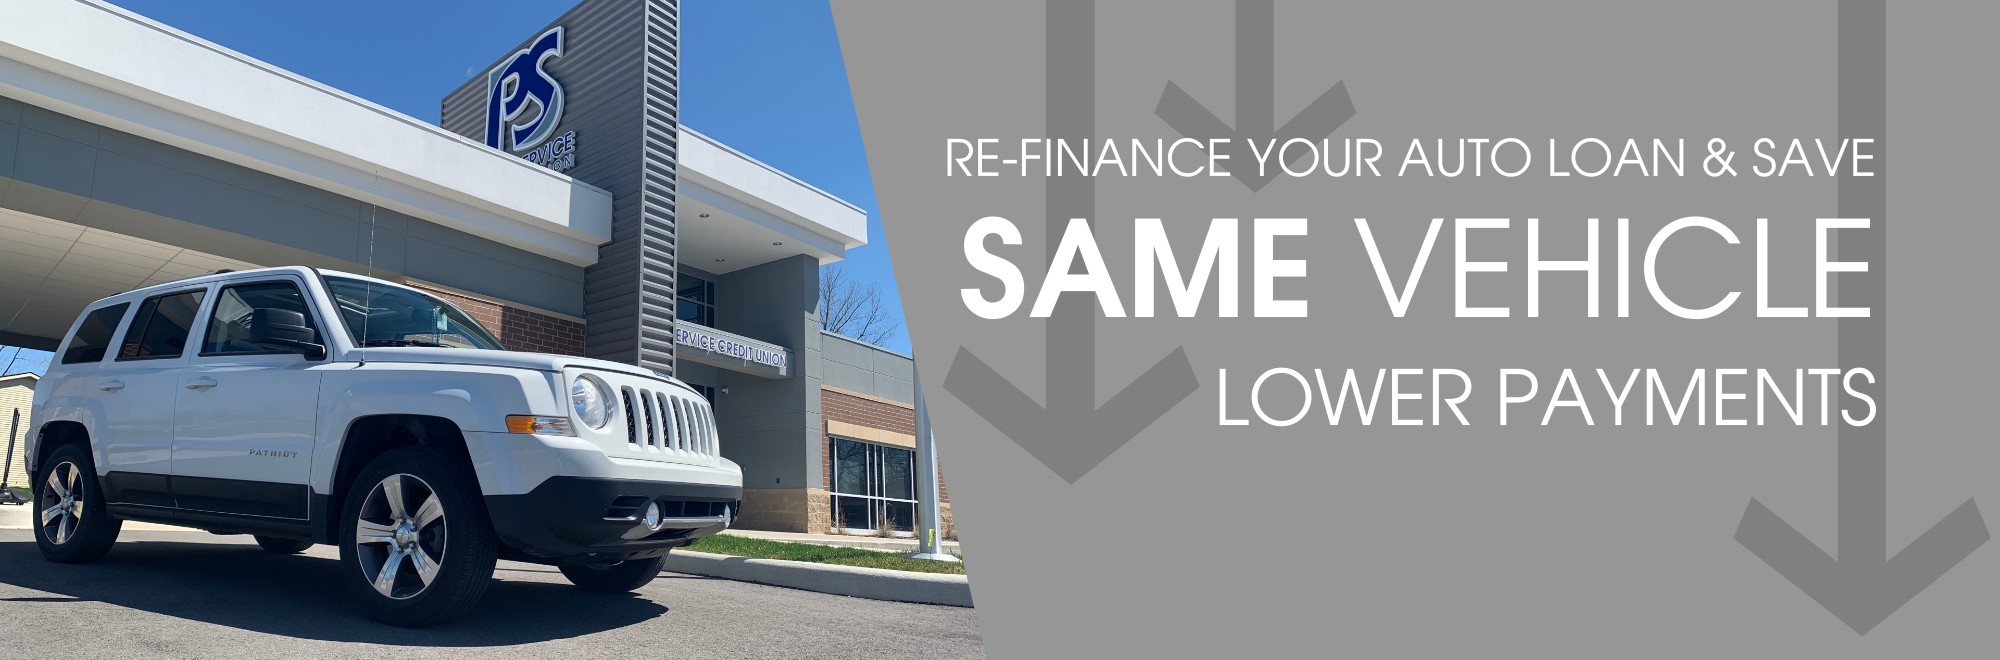 Refinance your auto loan and save money! Same Vehicle. Lower Payments